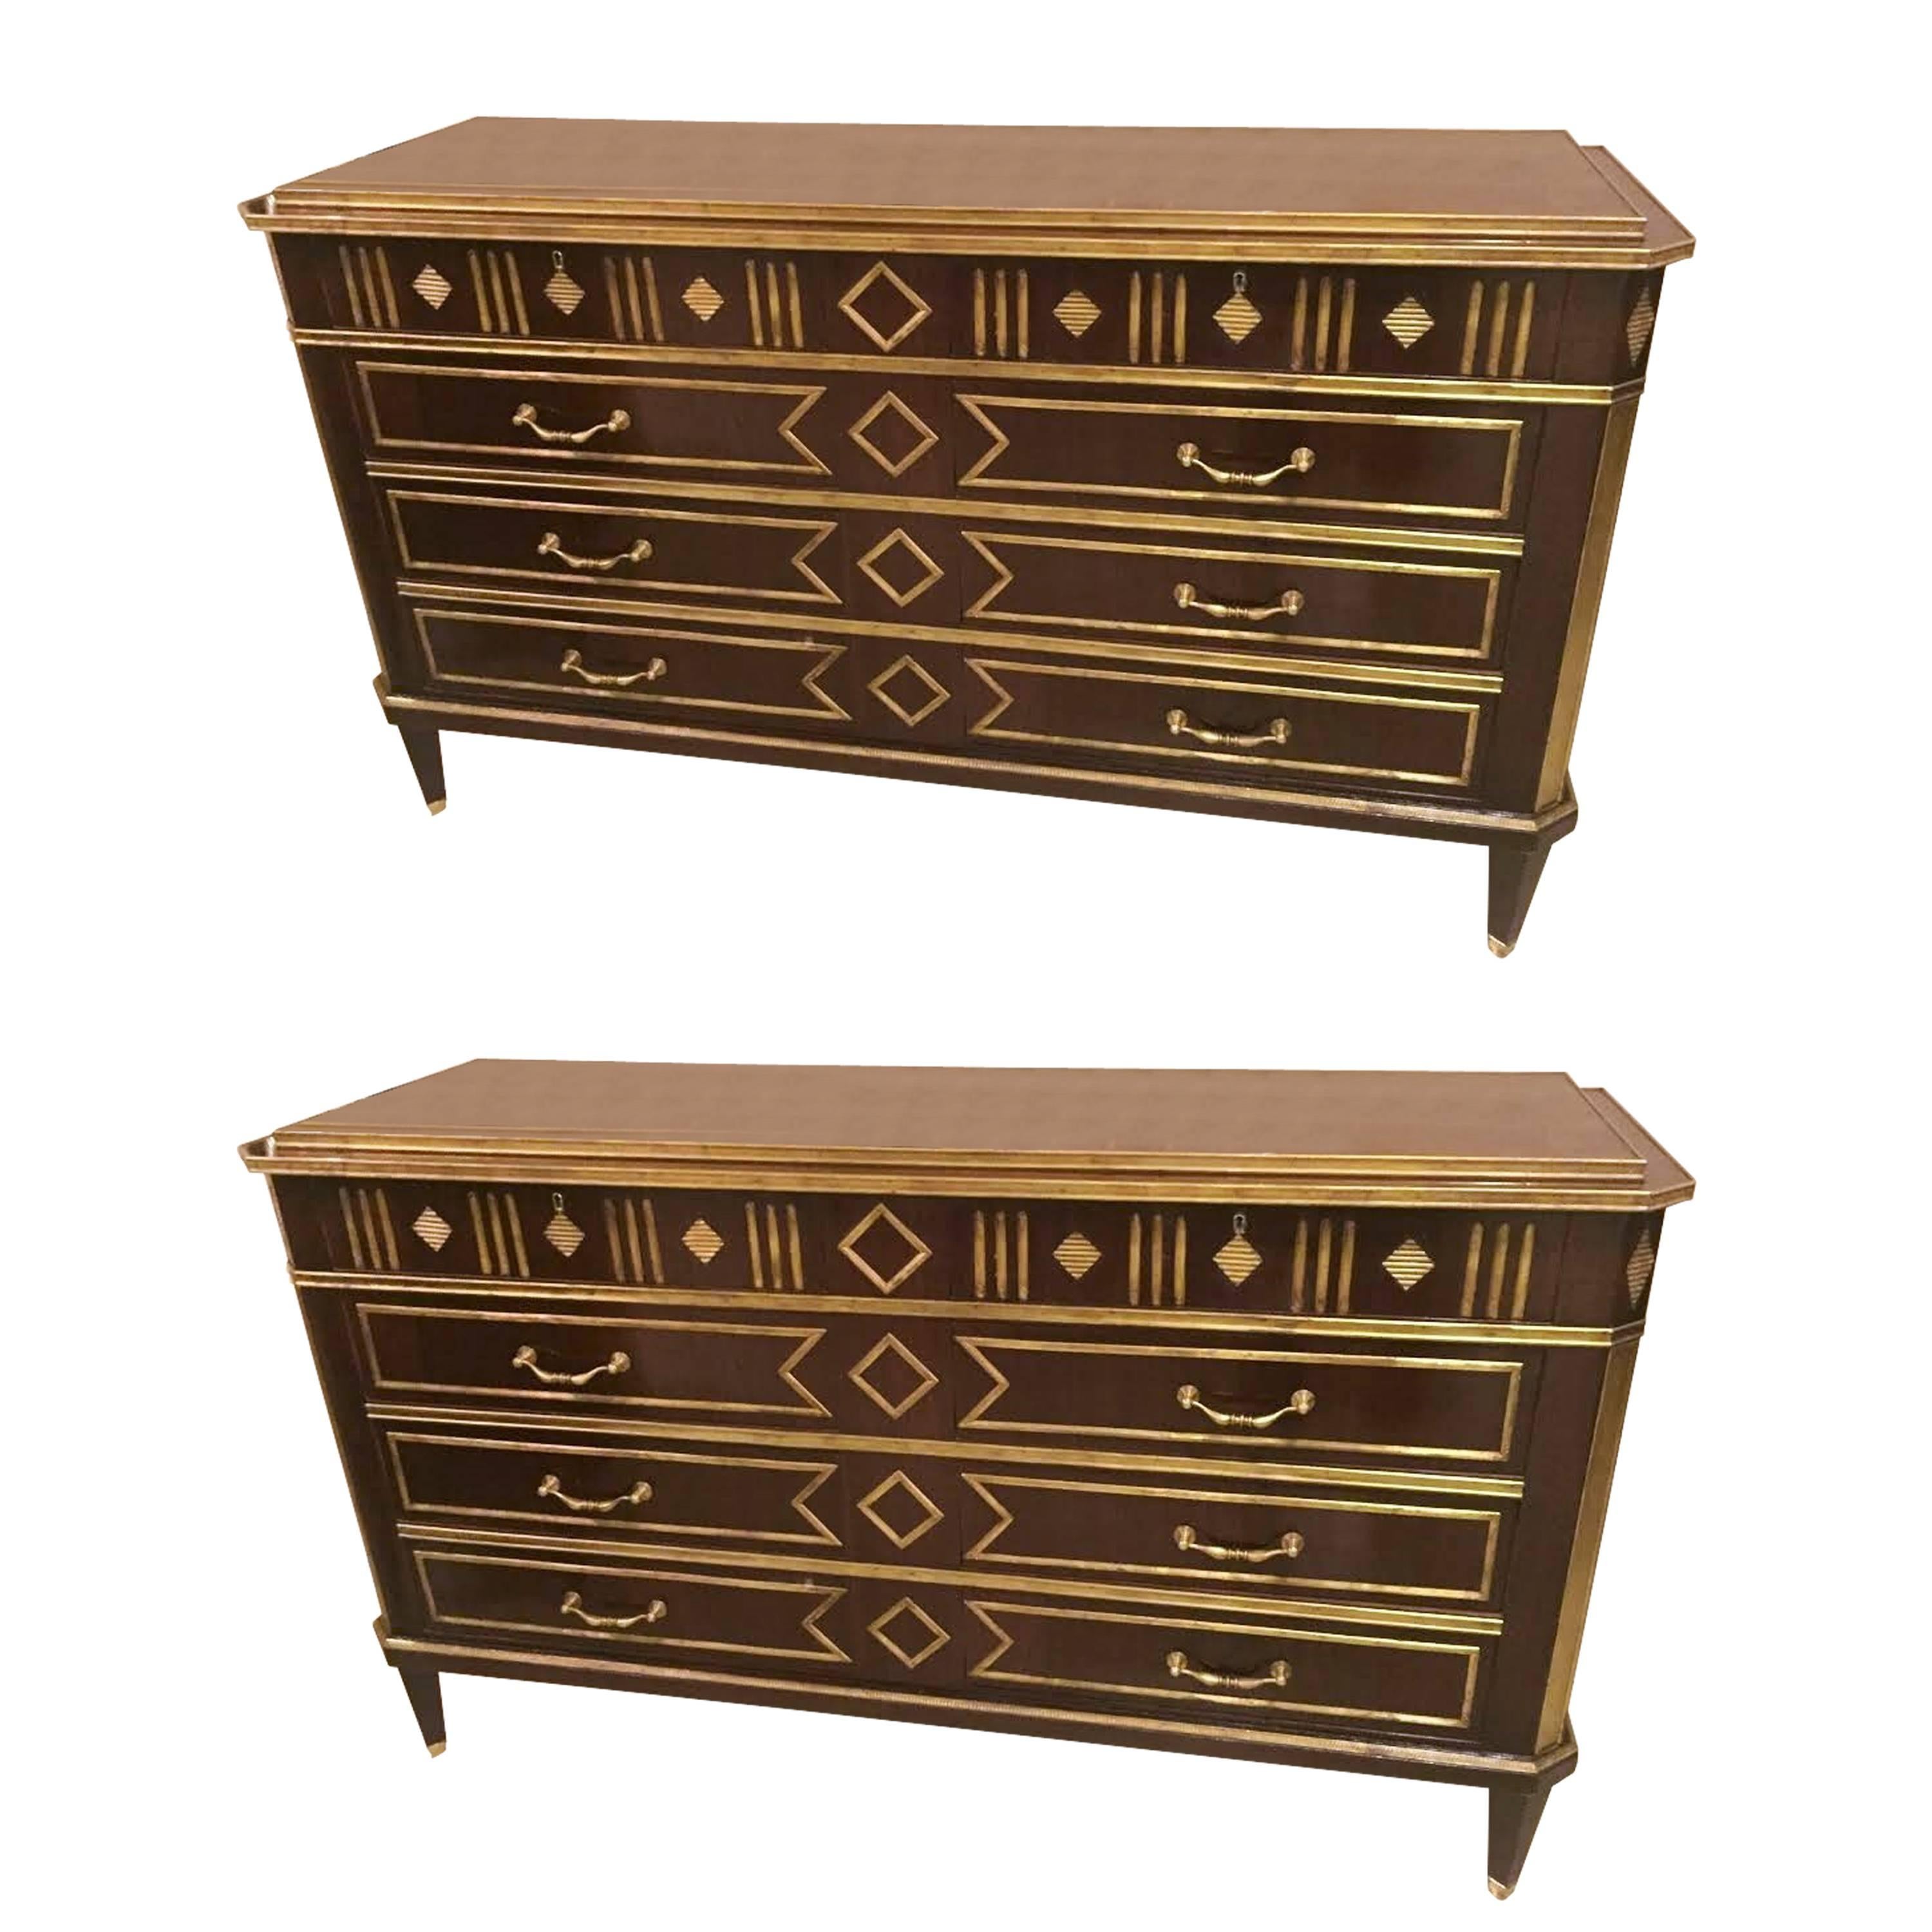 Pair of Monumental Russian Neoclassical Style Commodes / Chests Louis XVI Style